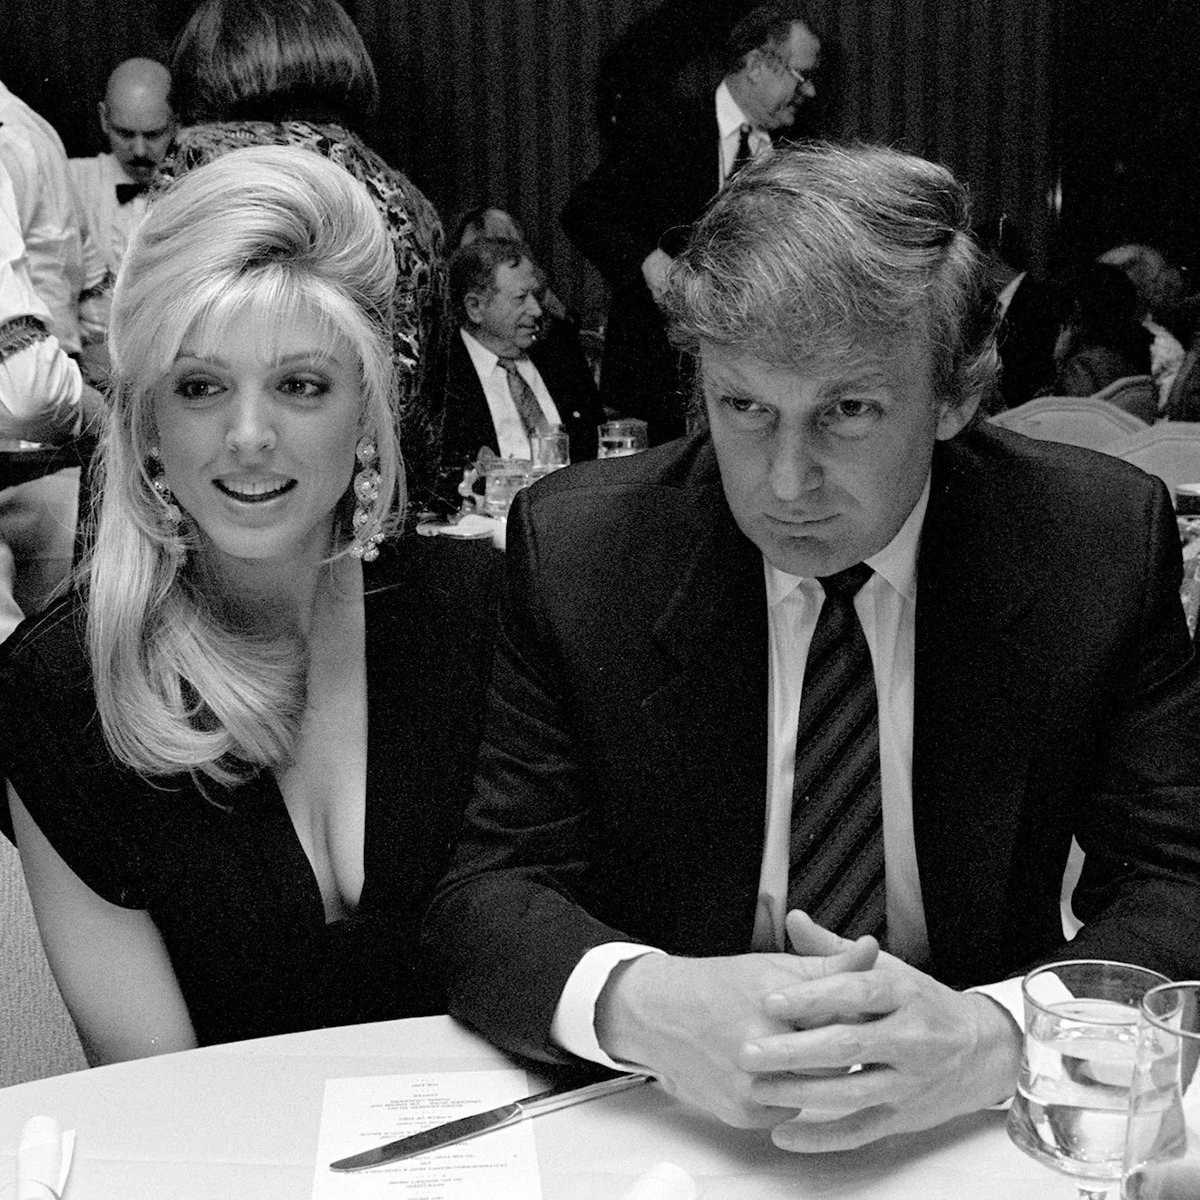 #DemVoice1 #ProudBlueEditorials #DemsUnited ”This editorial is solely my own opinion.I alone am responsible for the content” A personal story about Donald Trump, Marla Maples. The “Carpet King” Bob Shaw, Adolph Hitler and my wife Martha. My wife is a computer